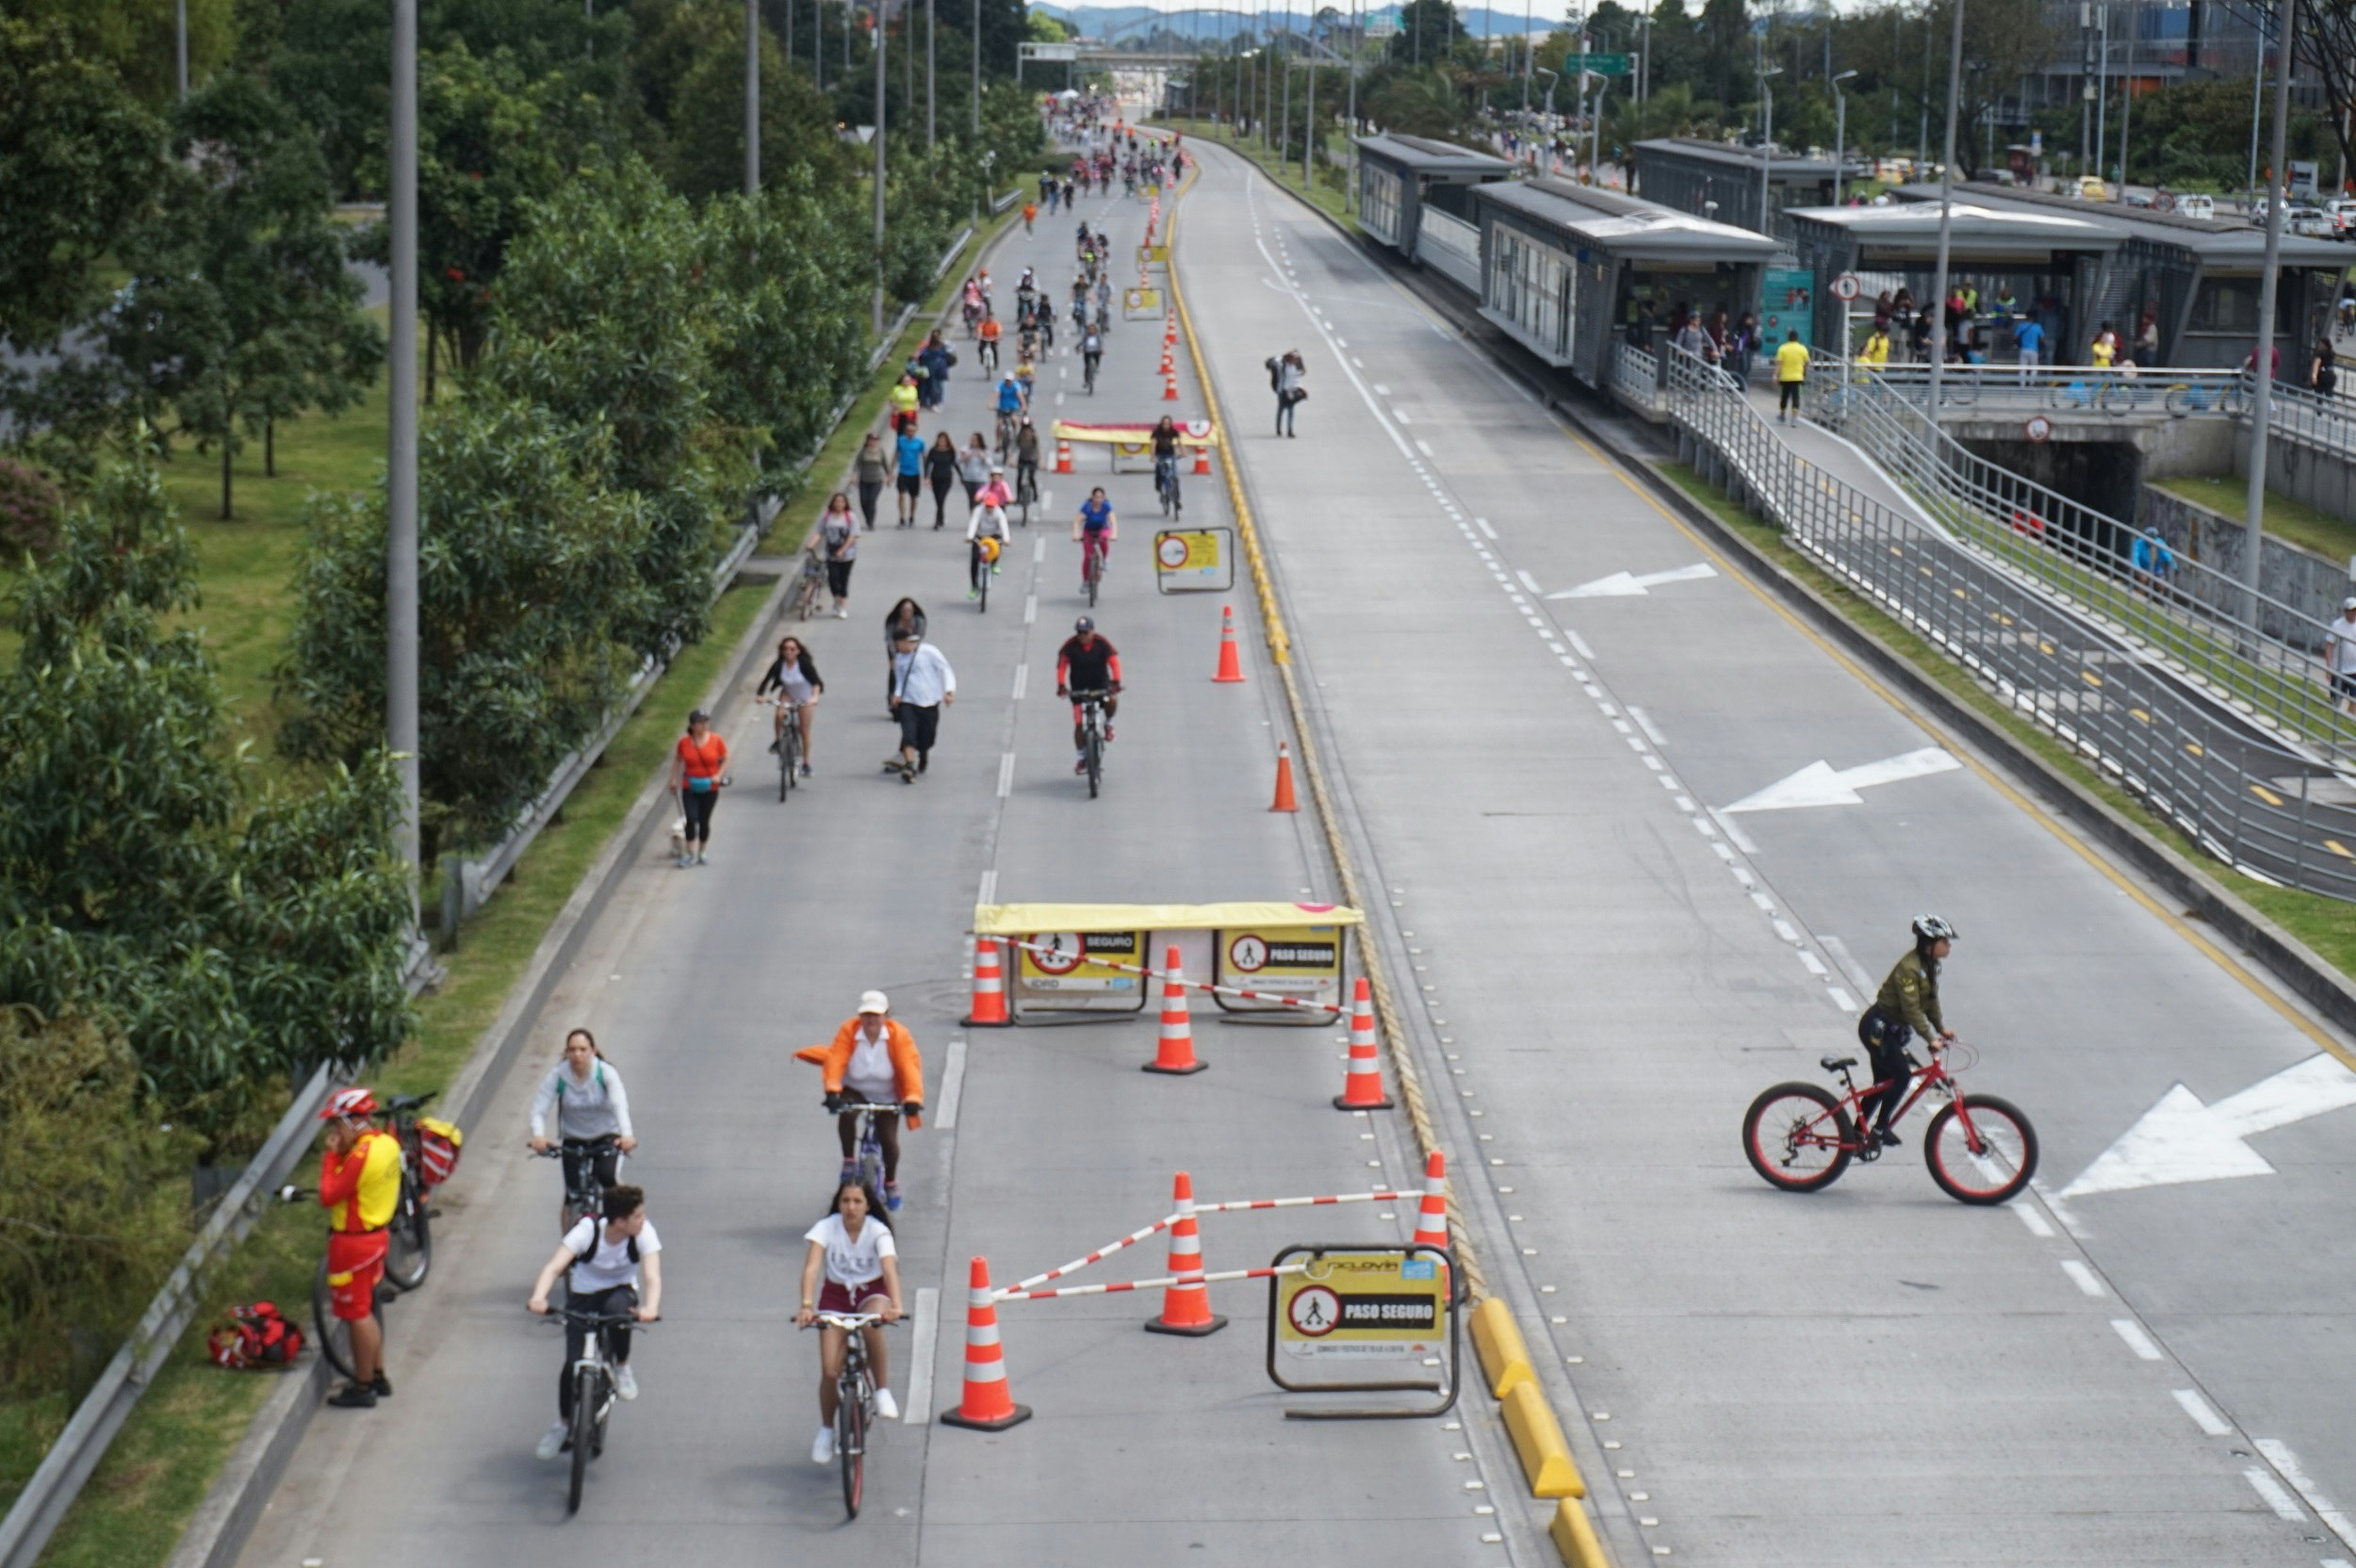 Looking down a main road from above, two lanes are filled with bicycles riding toward the camera; the opposite side of the road is empty bar a police person on a bike. A paramedic is standing next to their bike by the side of the road.